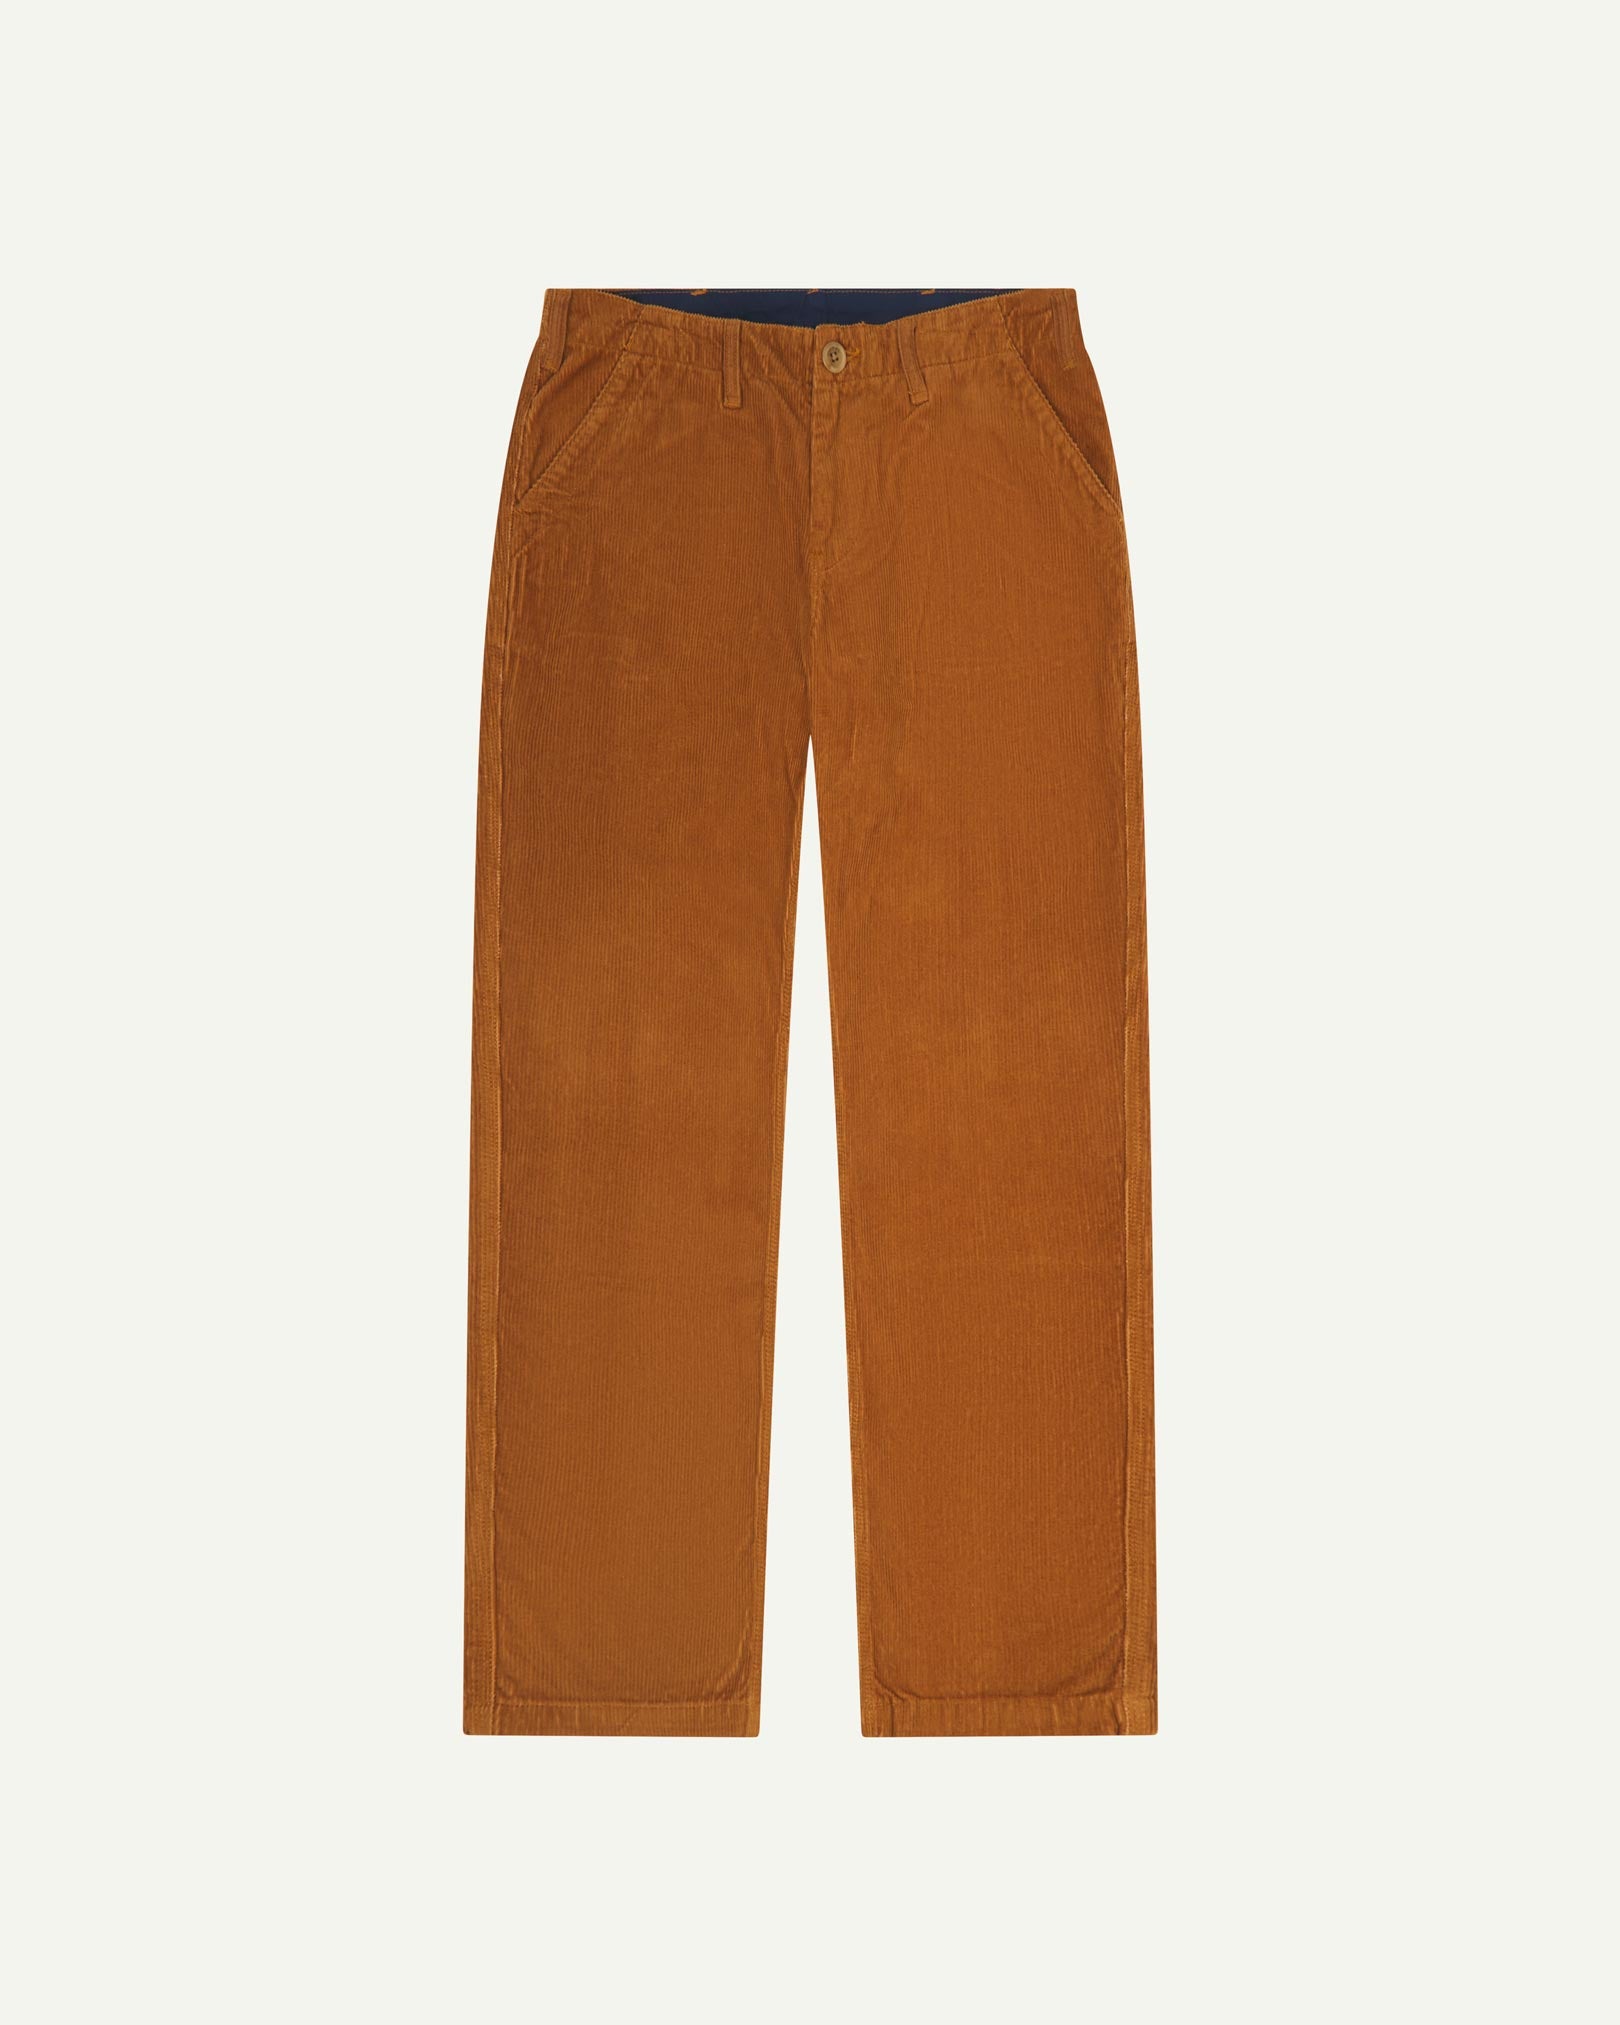 Front flat view of 5005 Uskees men's organic corduroy 'tan' casual trousers with view of YKK zip fly and Corozo buttons.